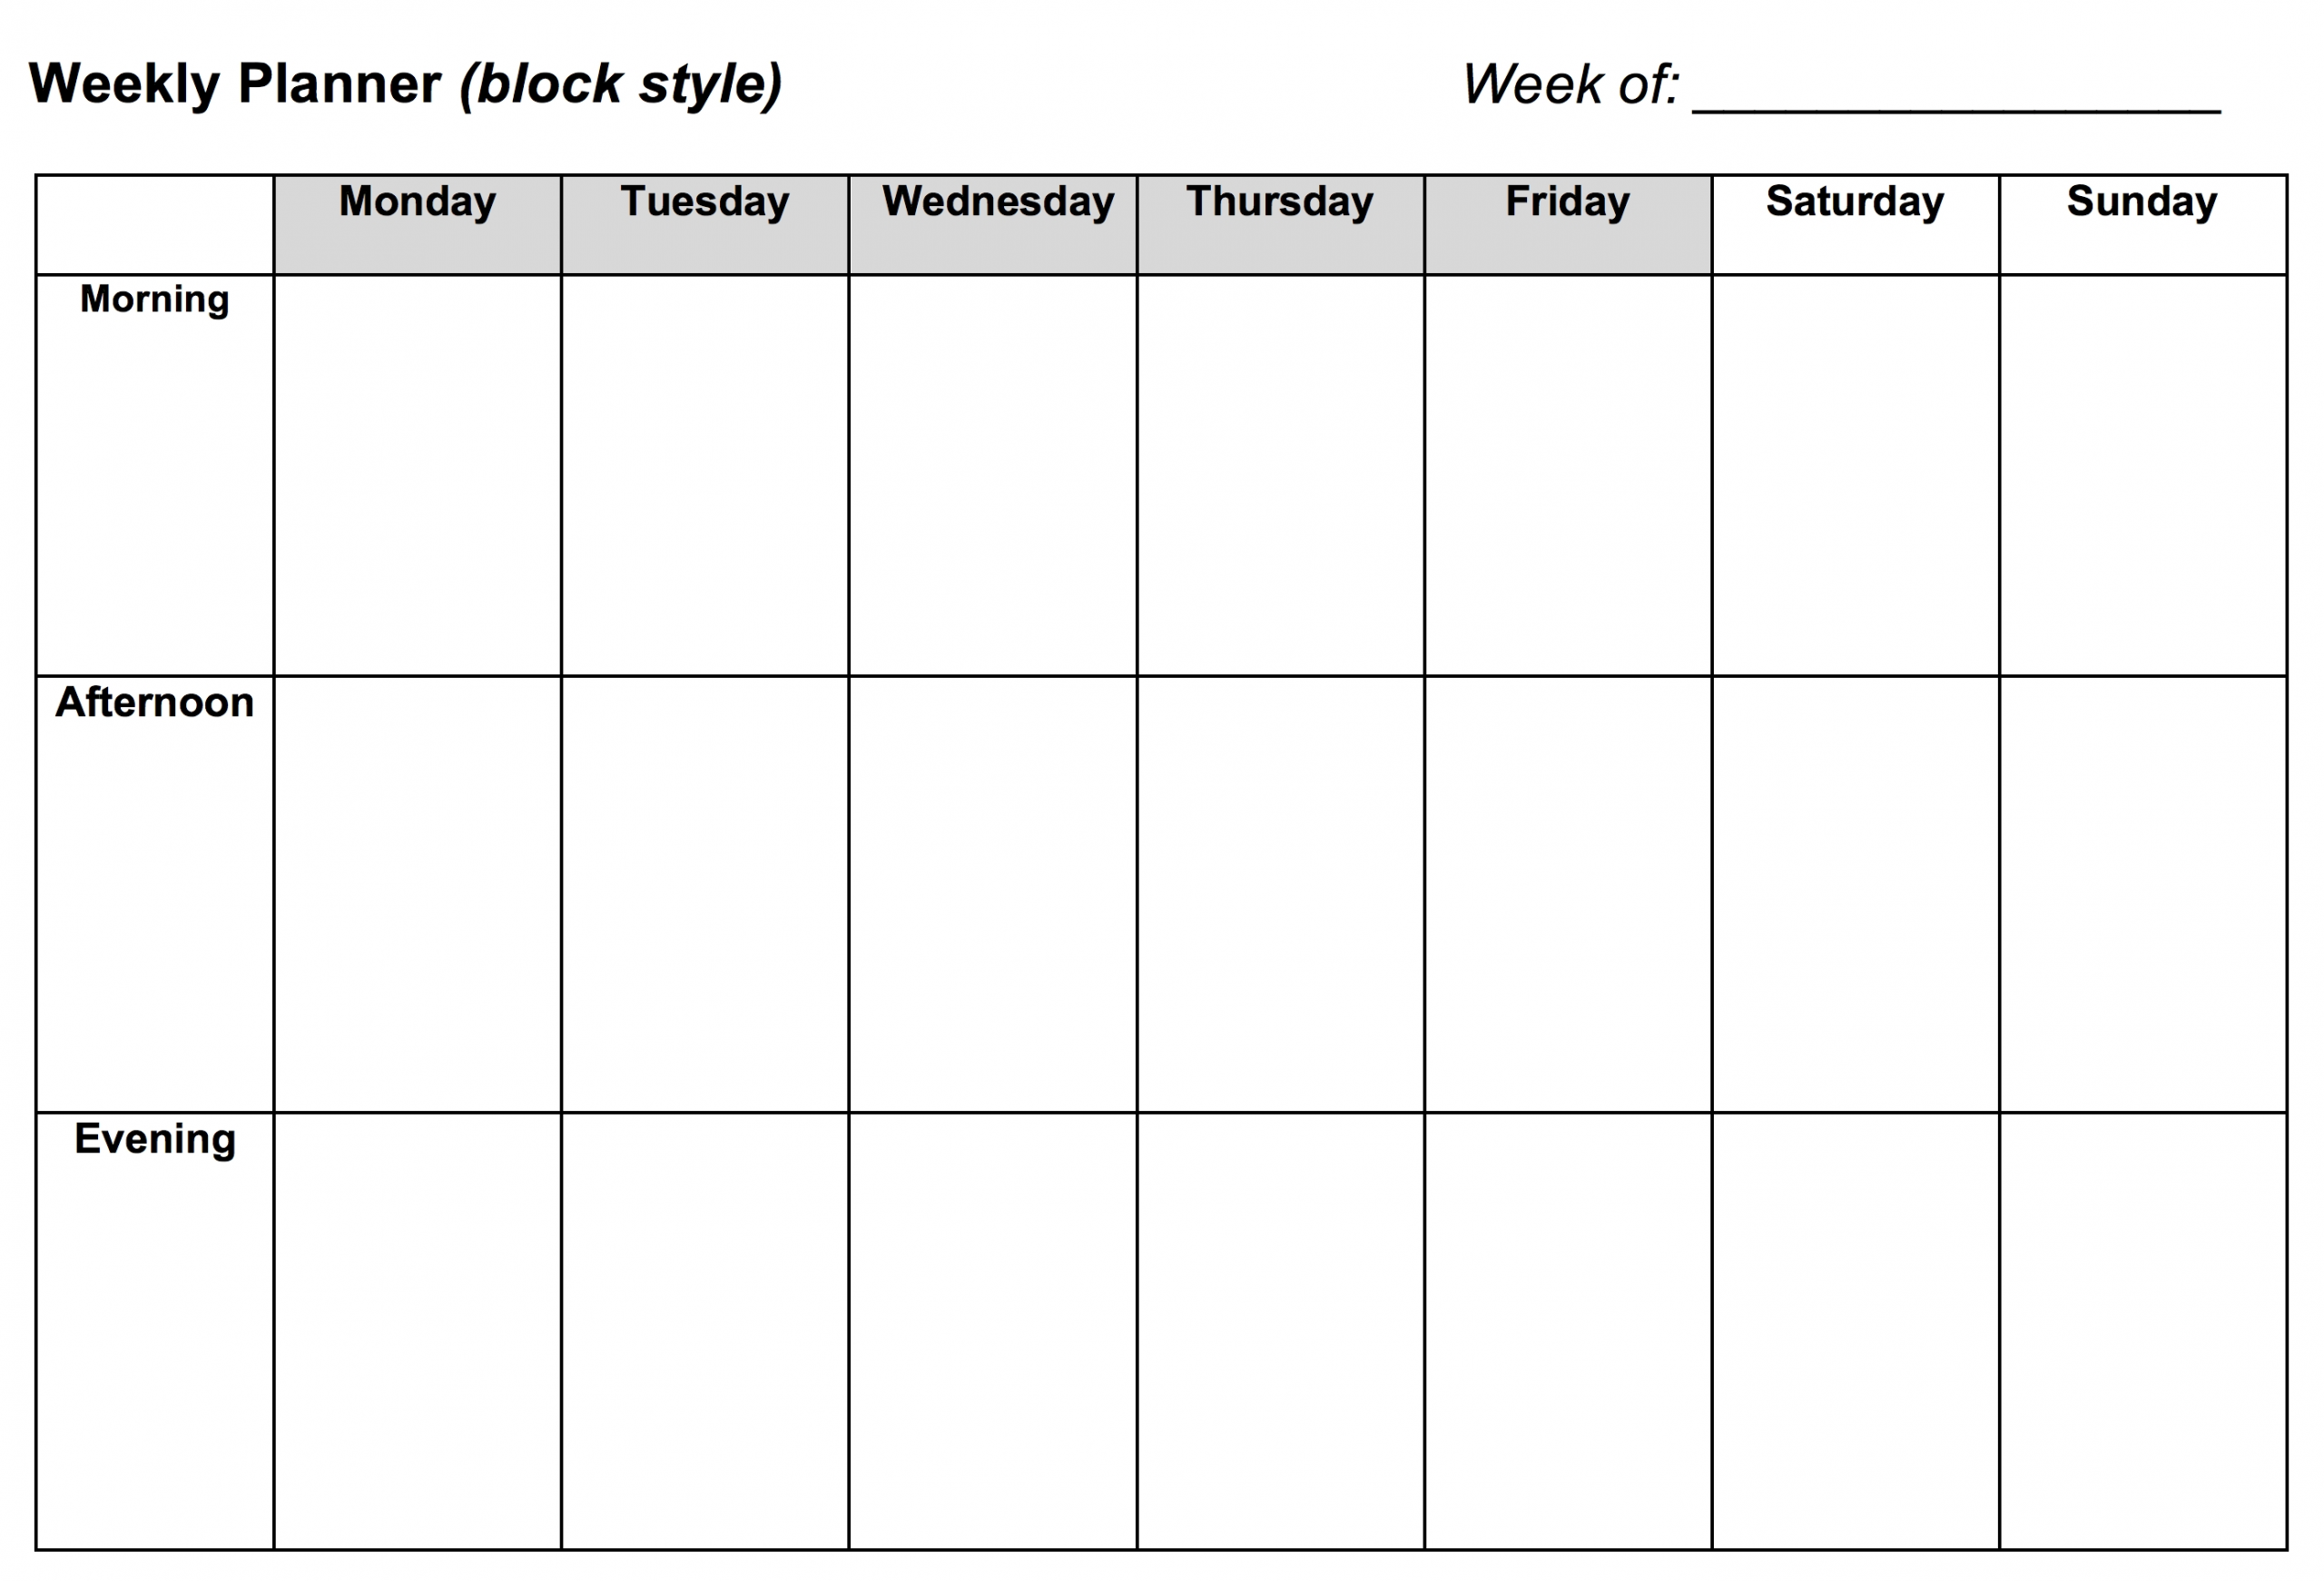 Weekly Planner: Block Style – Learning Center